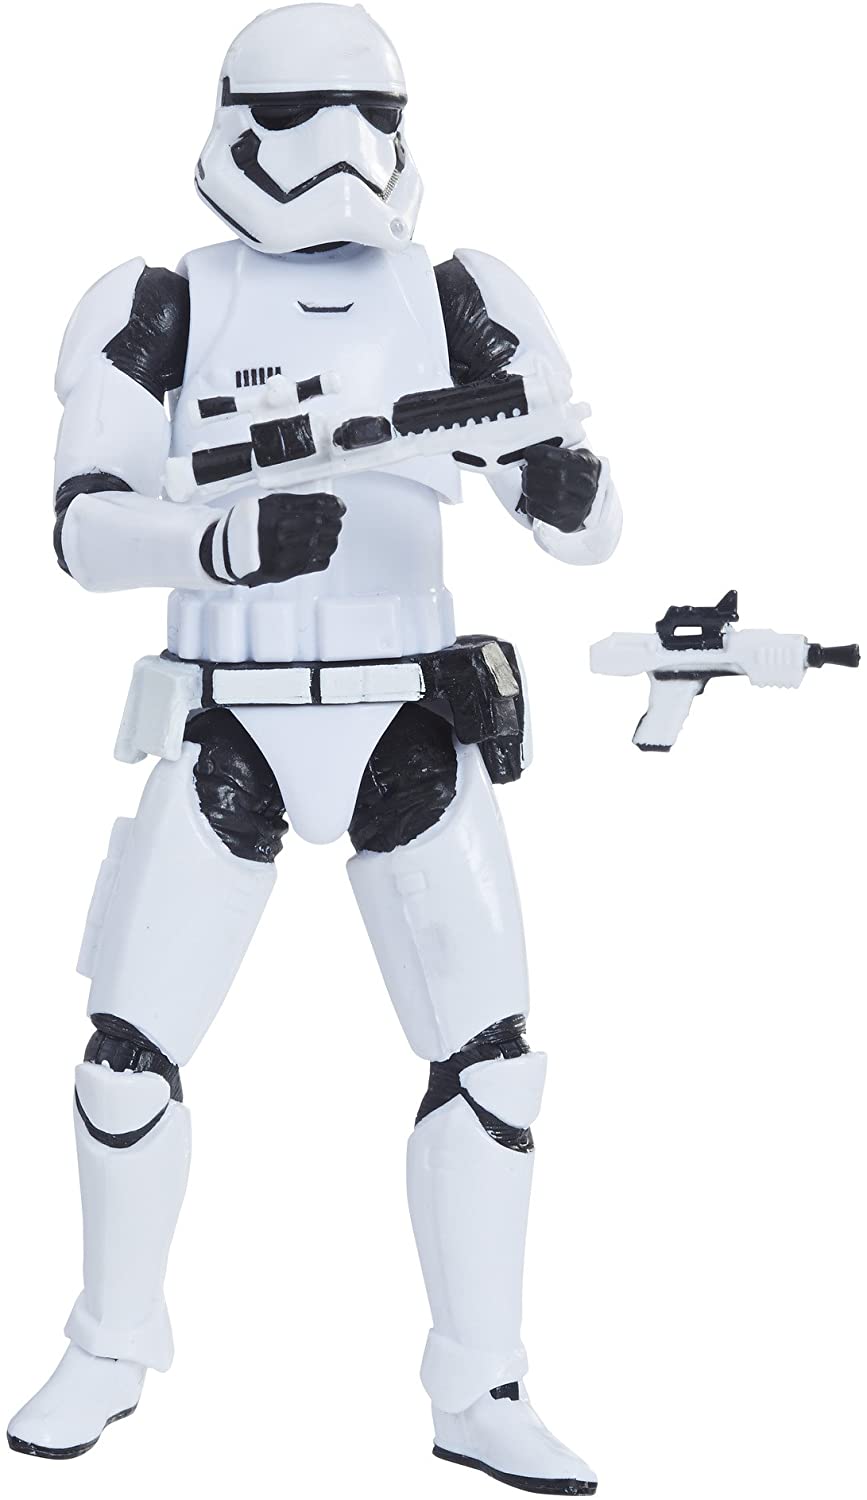 Star Wars The Vintage Collection Force Awakens Stormtrooper Action Figure